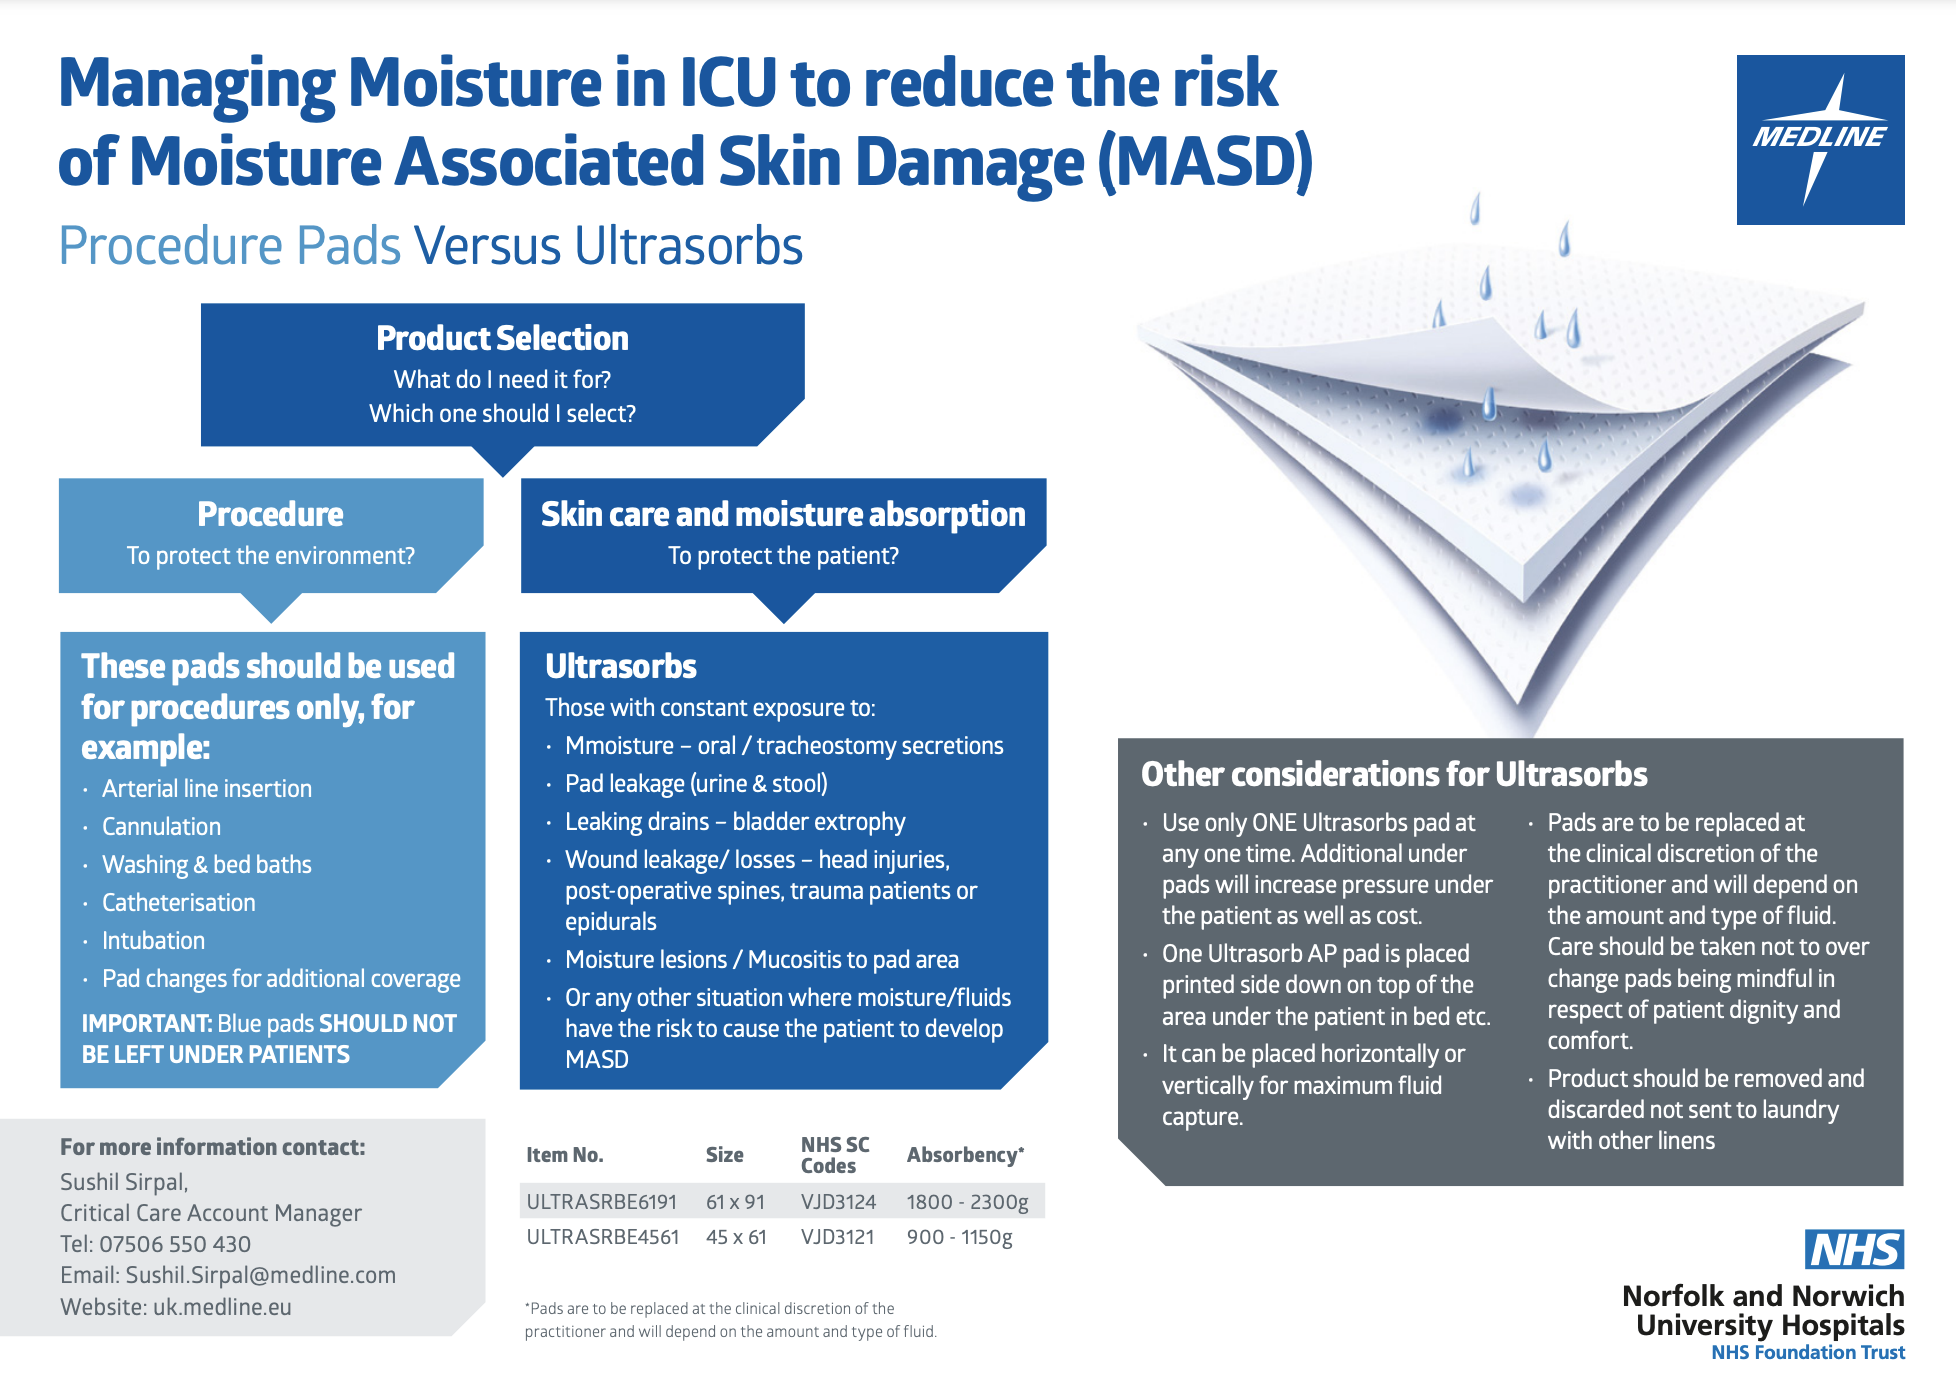 Reducing Moisture in NNUH Critical Care featured image